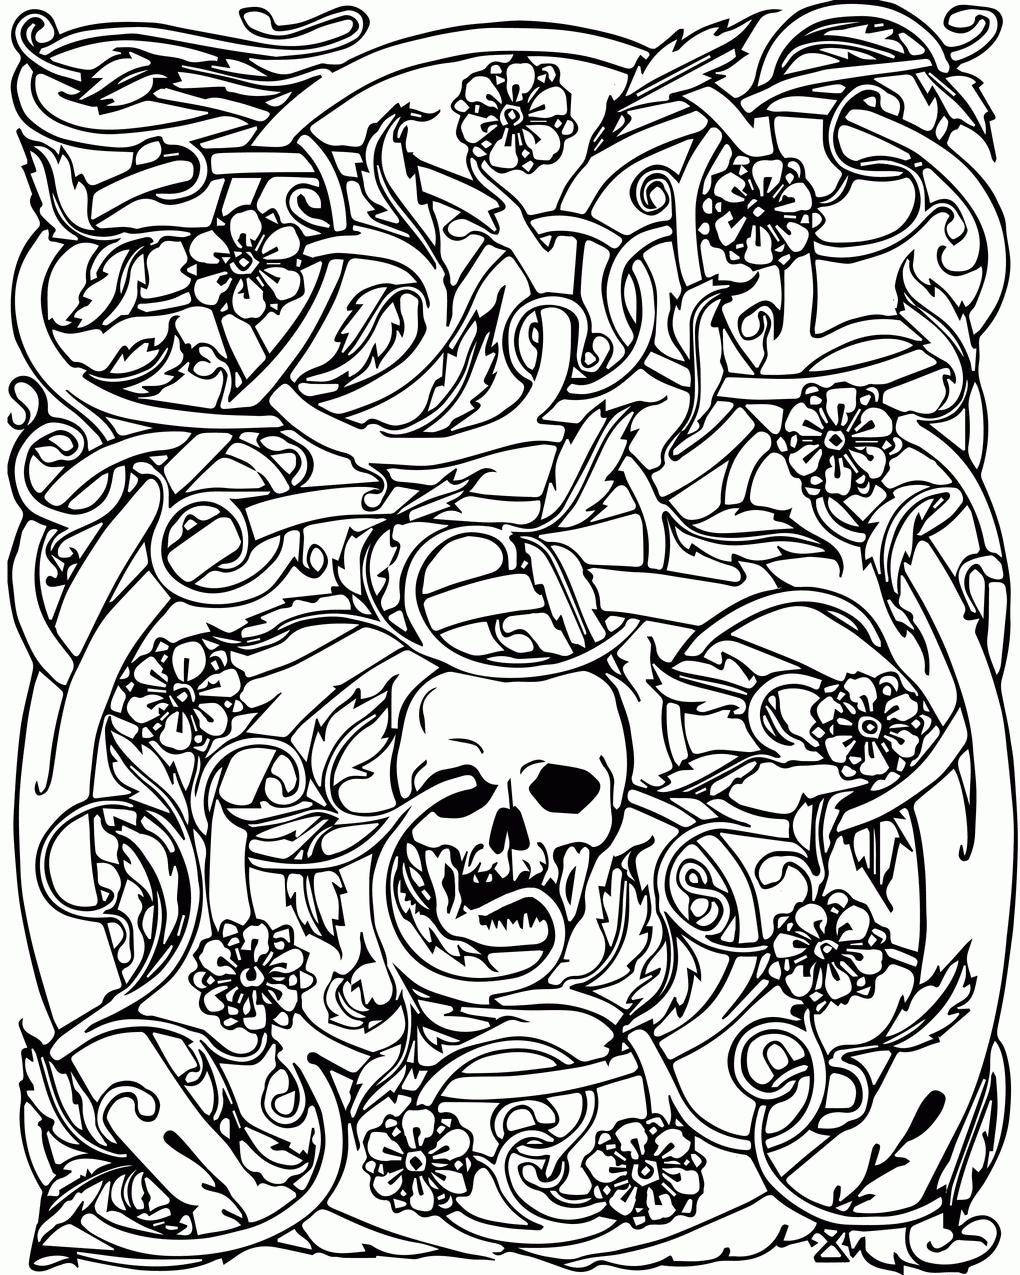 Halloween Adult Coloring Pages - Coloring Home